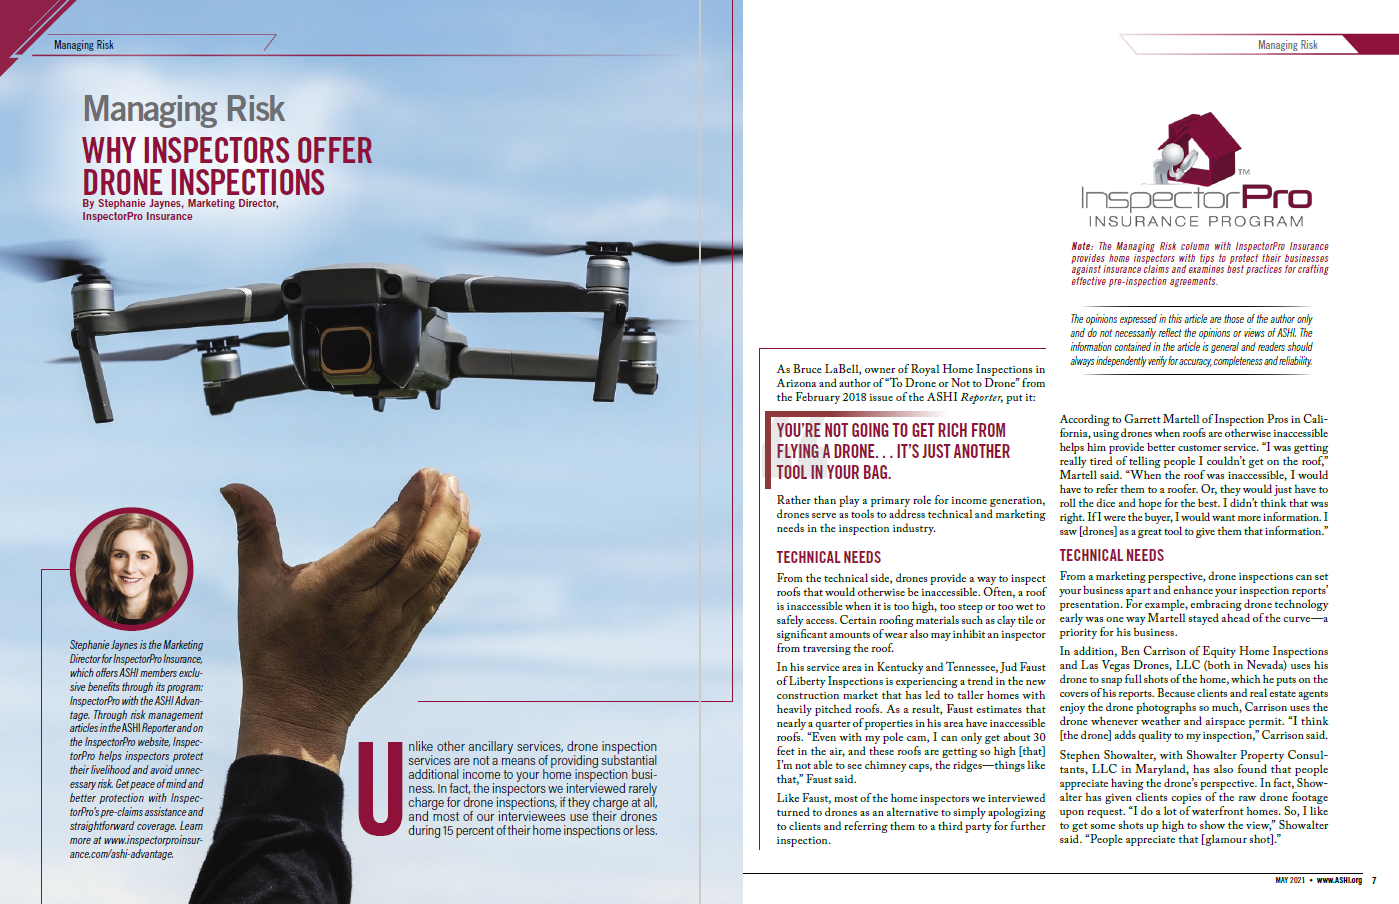 Picture of drone inspection article in magazine